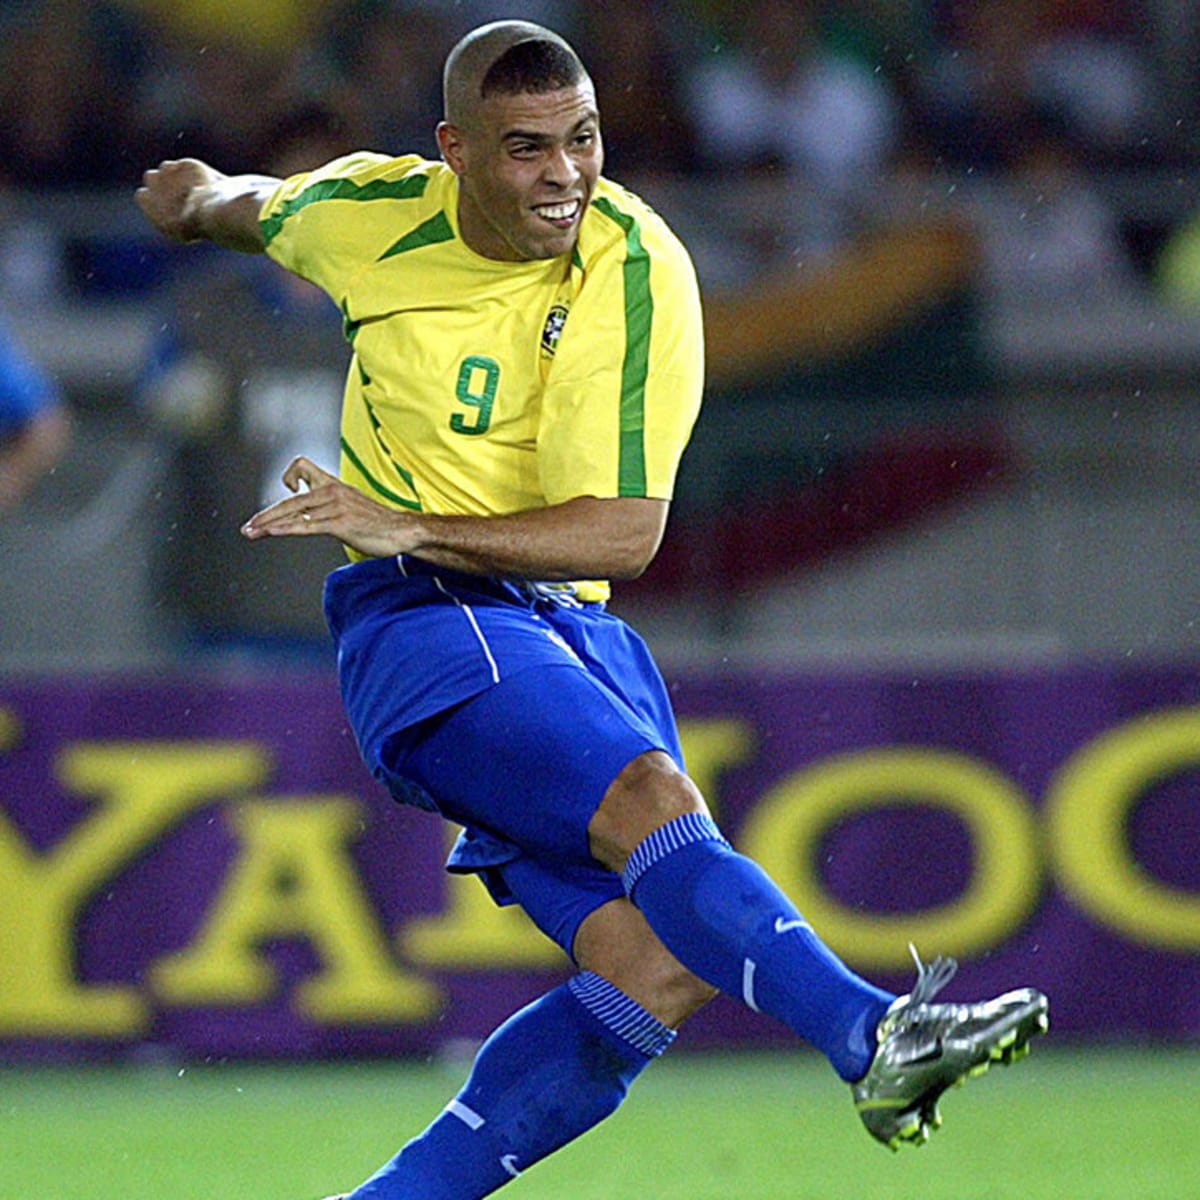 Brazil's 2002 World Cup winning team - Who were the players and where are  they now?